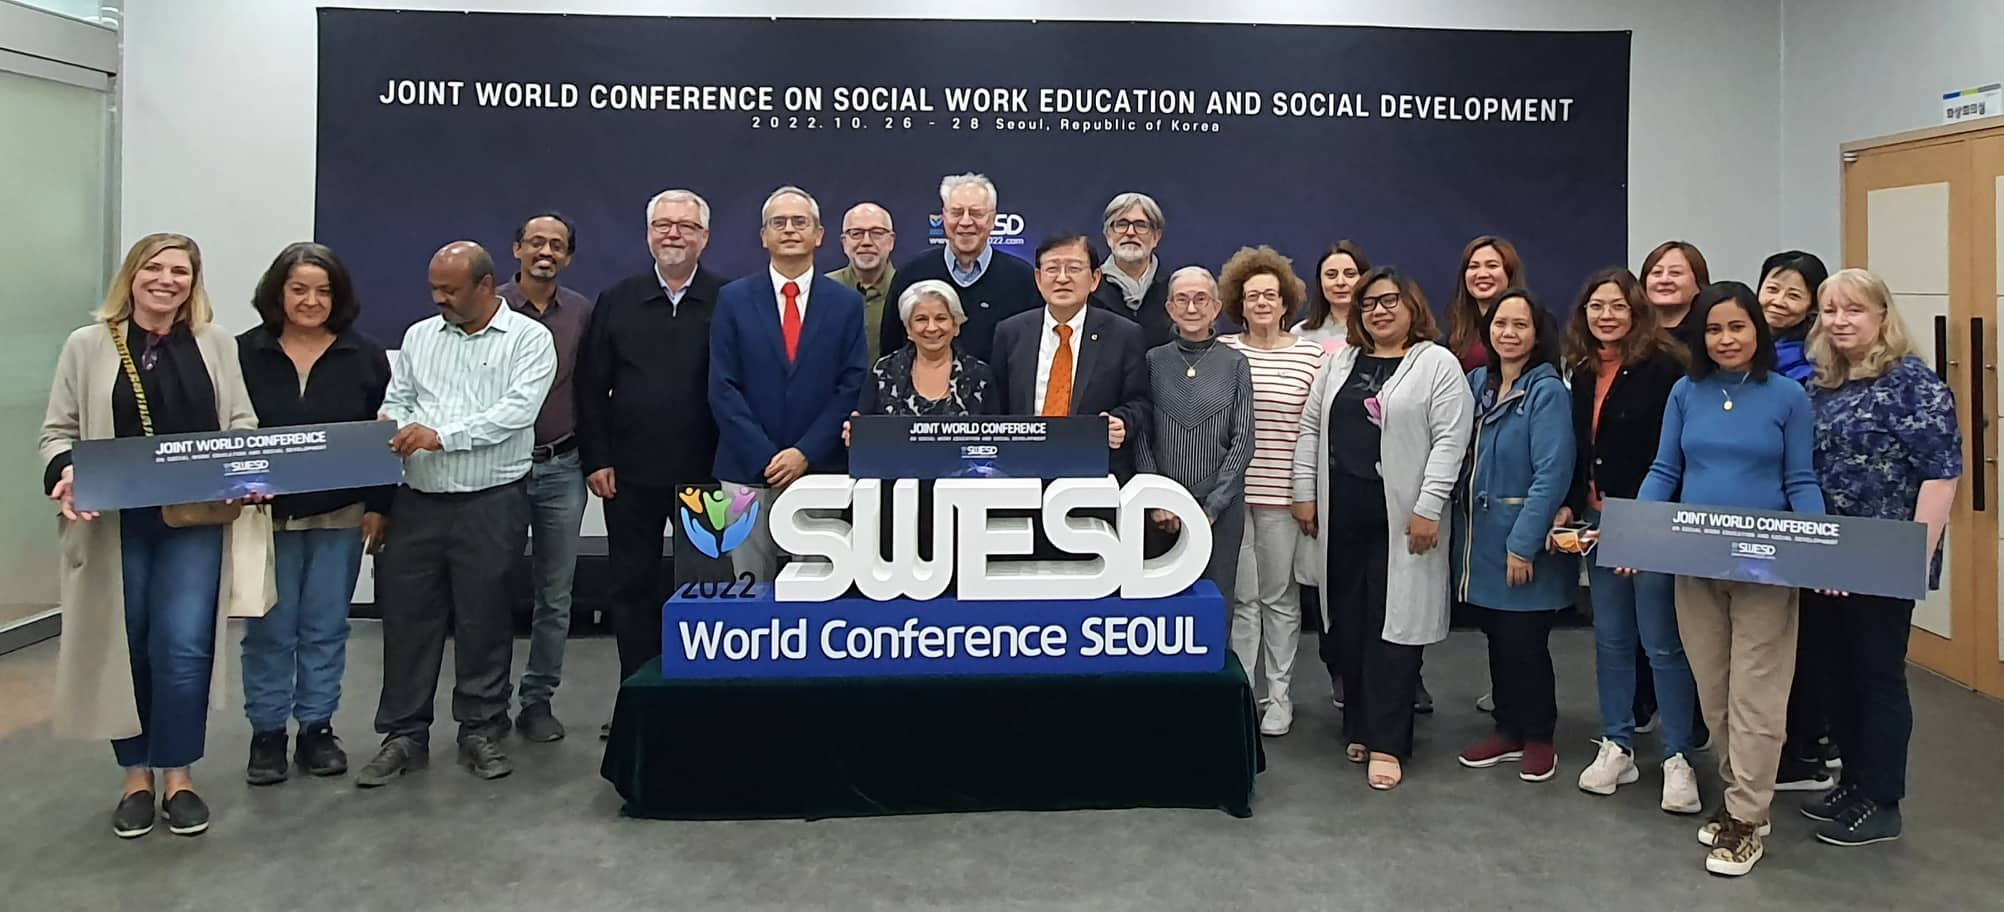 UP CSWCD Presentation at the World Conference on Social Work Education in Seoul